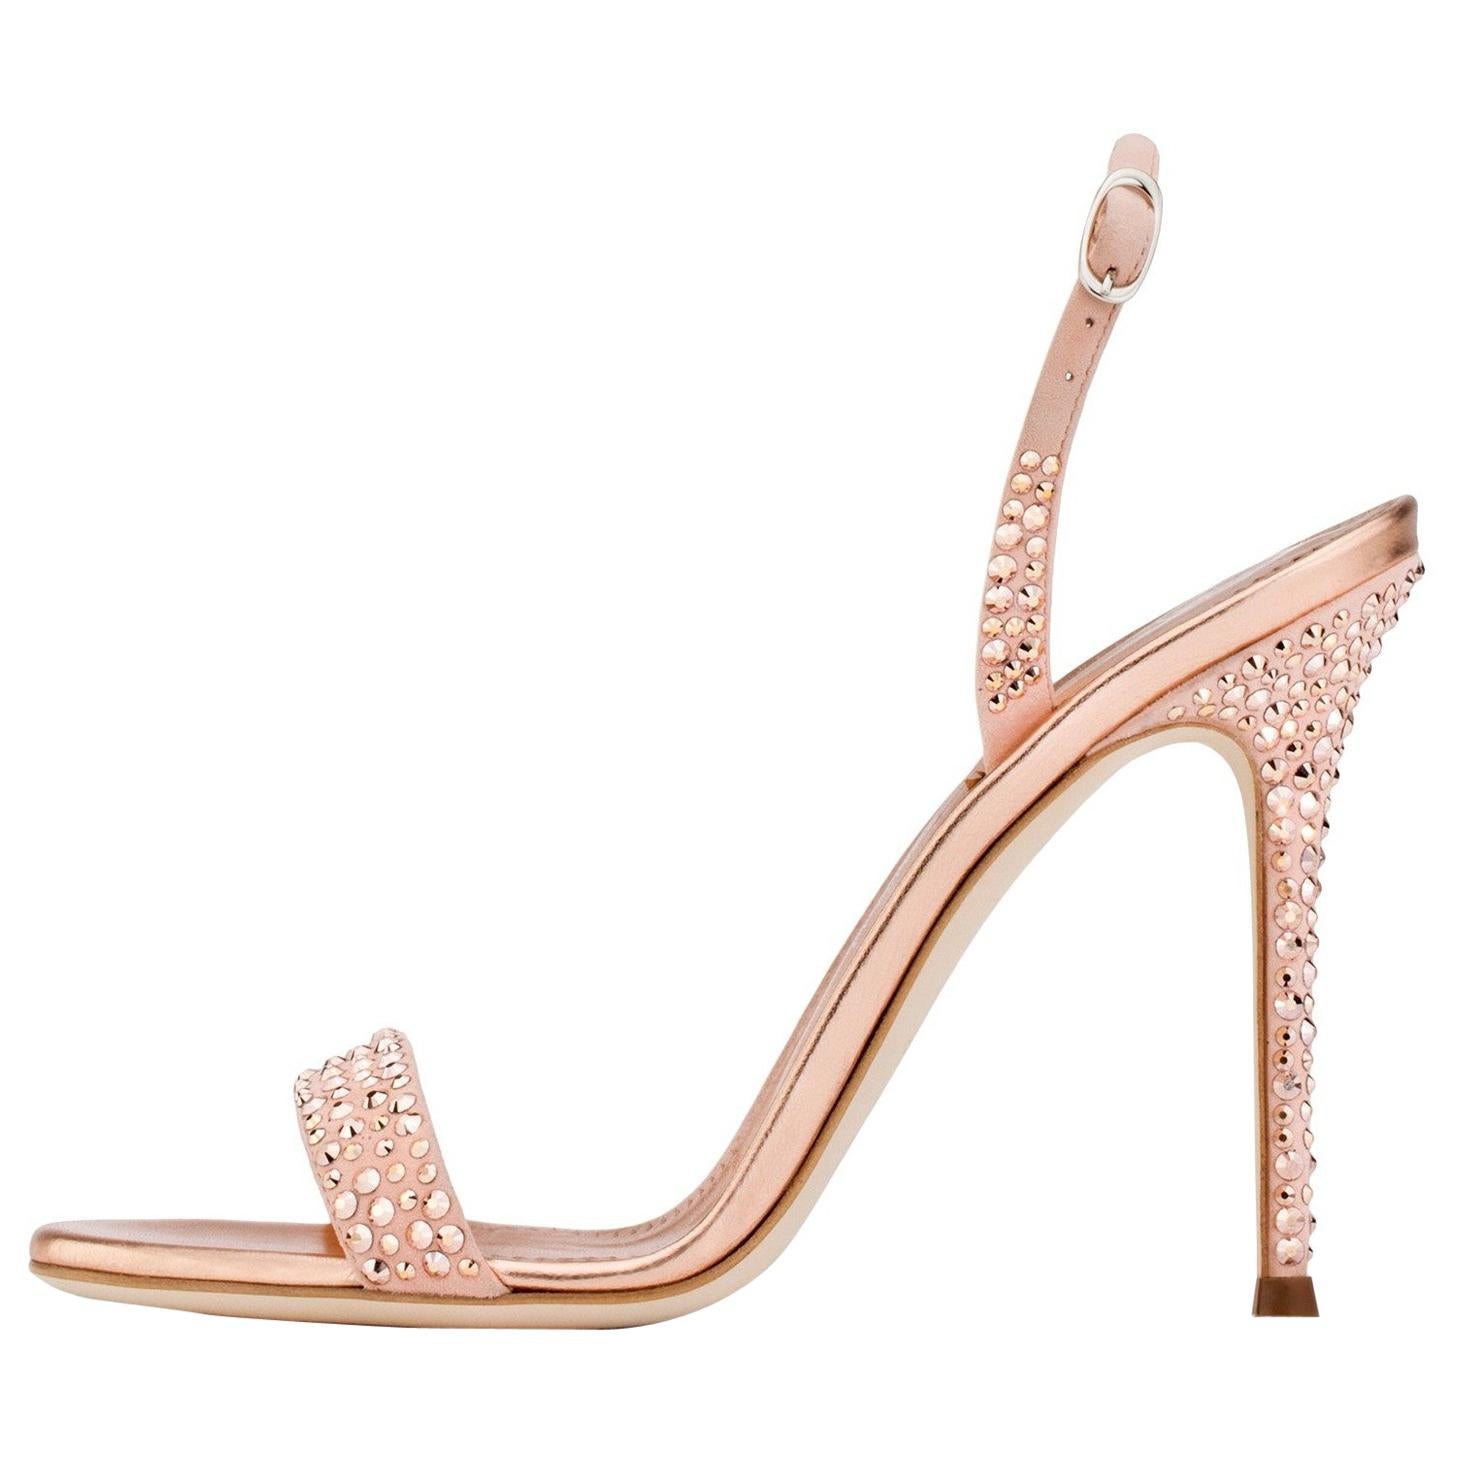 Giuseppe Zanotti NEW Rose Gold Suede Crystal Evening Sandals Heels in Box